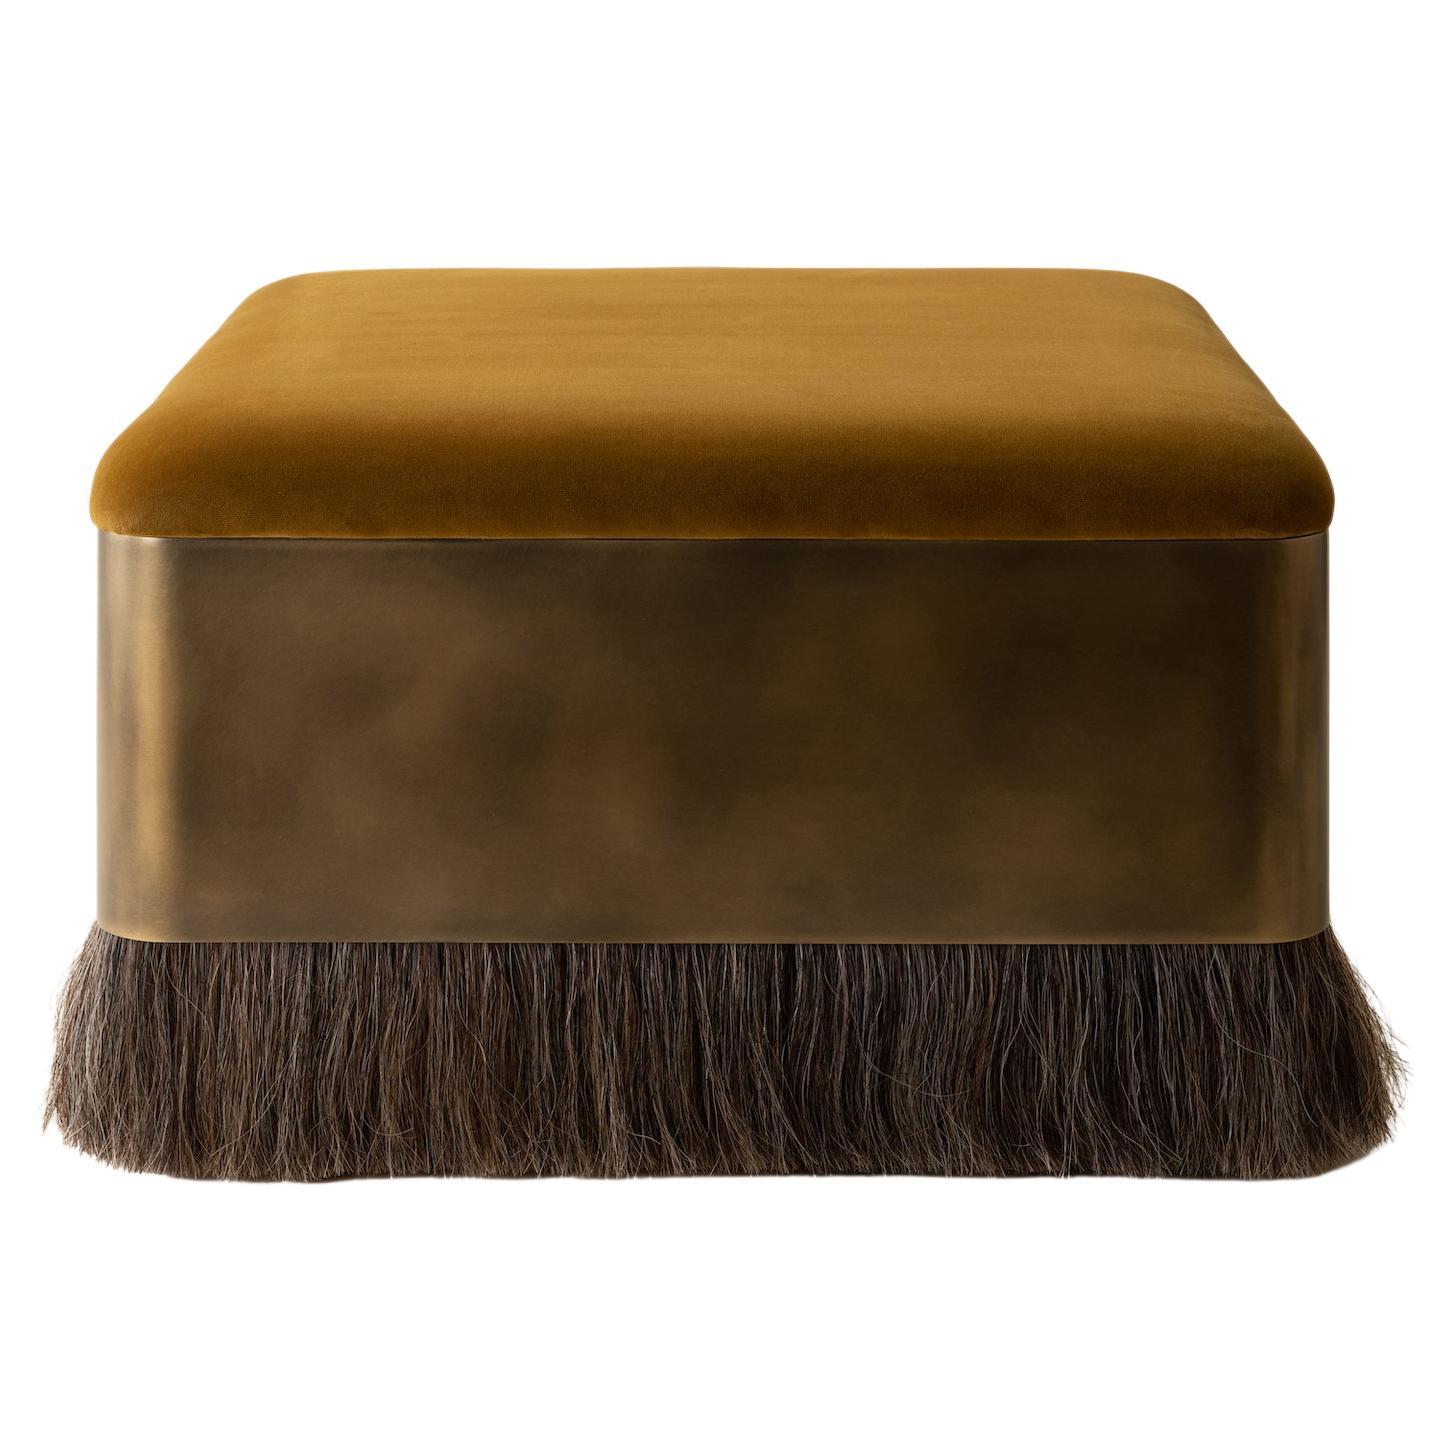 Konekt Thing 4 Square Ottoman with Antique Brass, Horse Hair and Velvet